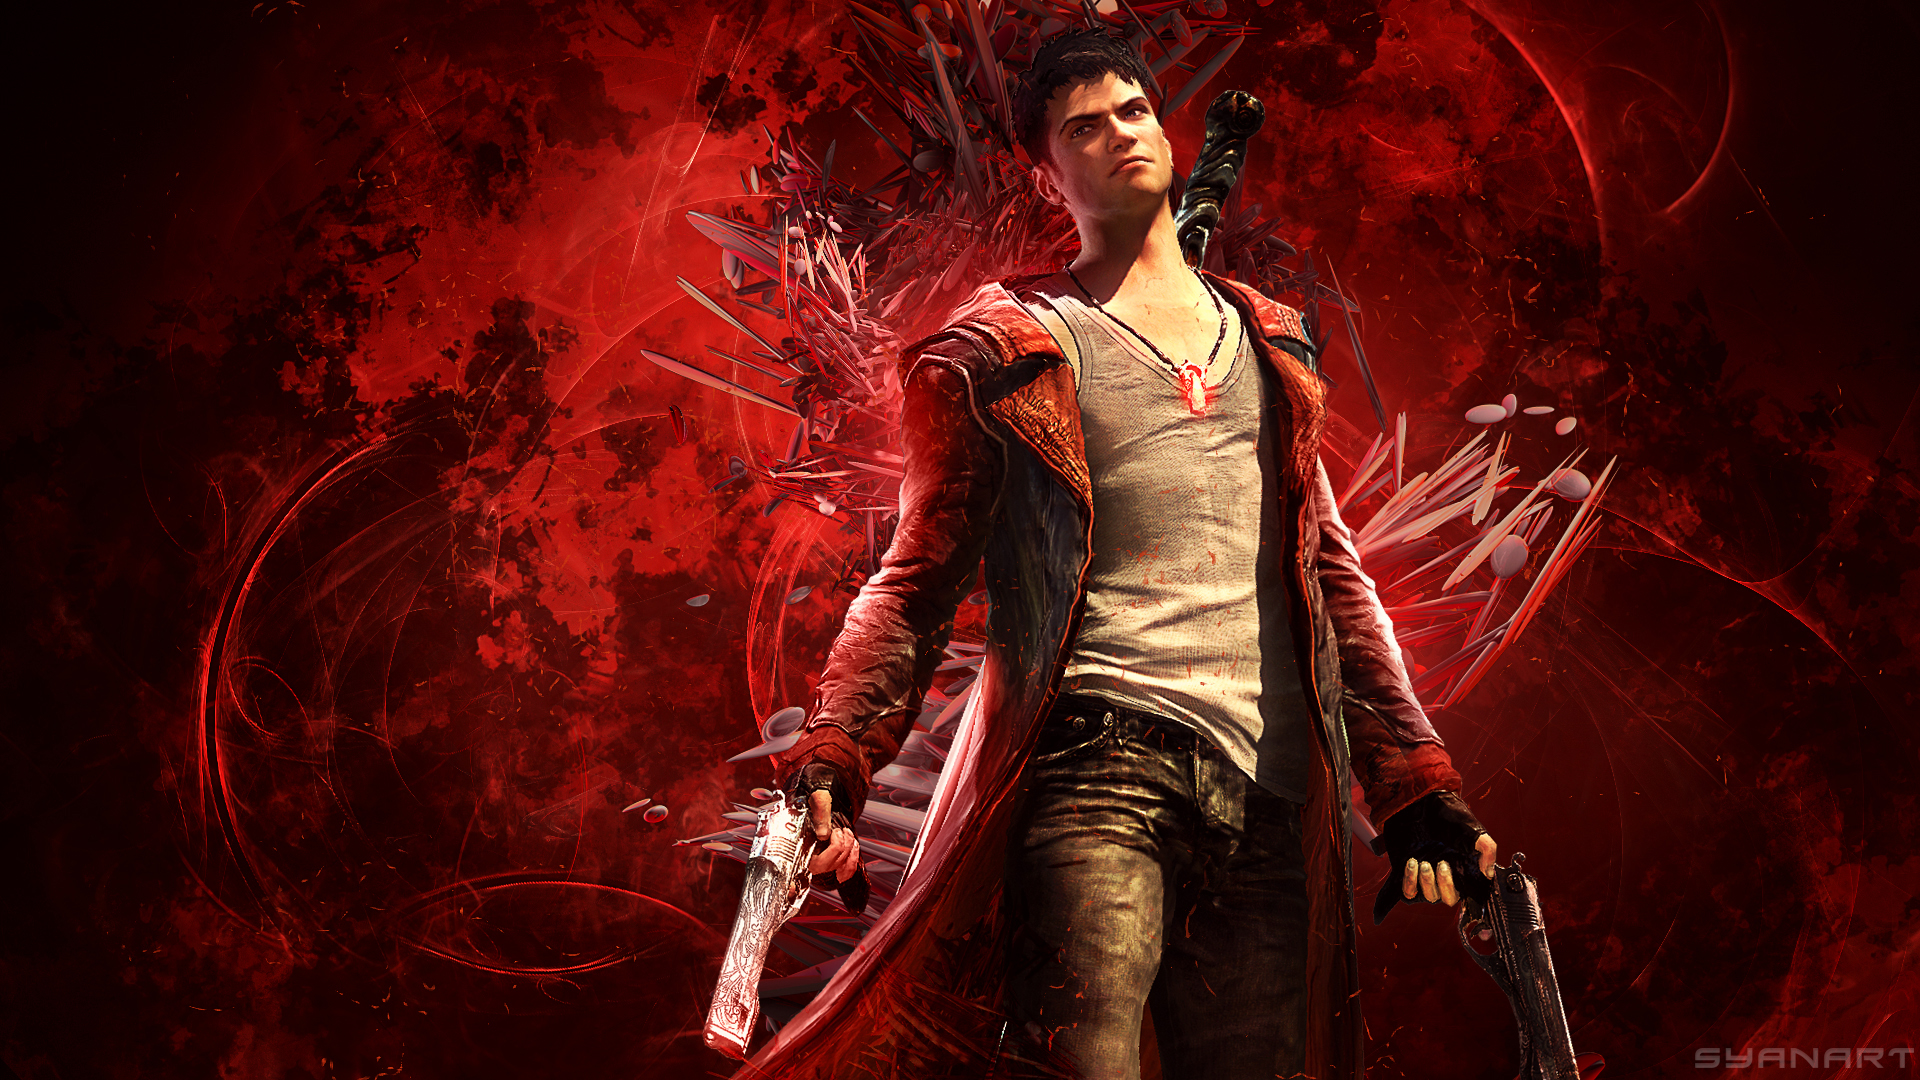 Handy-Wallpaper Devil May Cry, Computerspiele, Dante (Devil May Cry), Dmc: Devil May Cry kostenlos herunterladen.